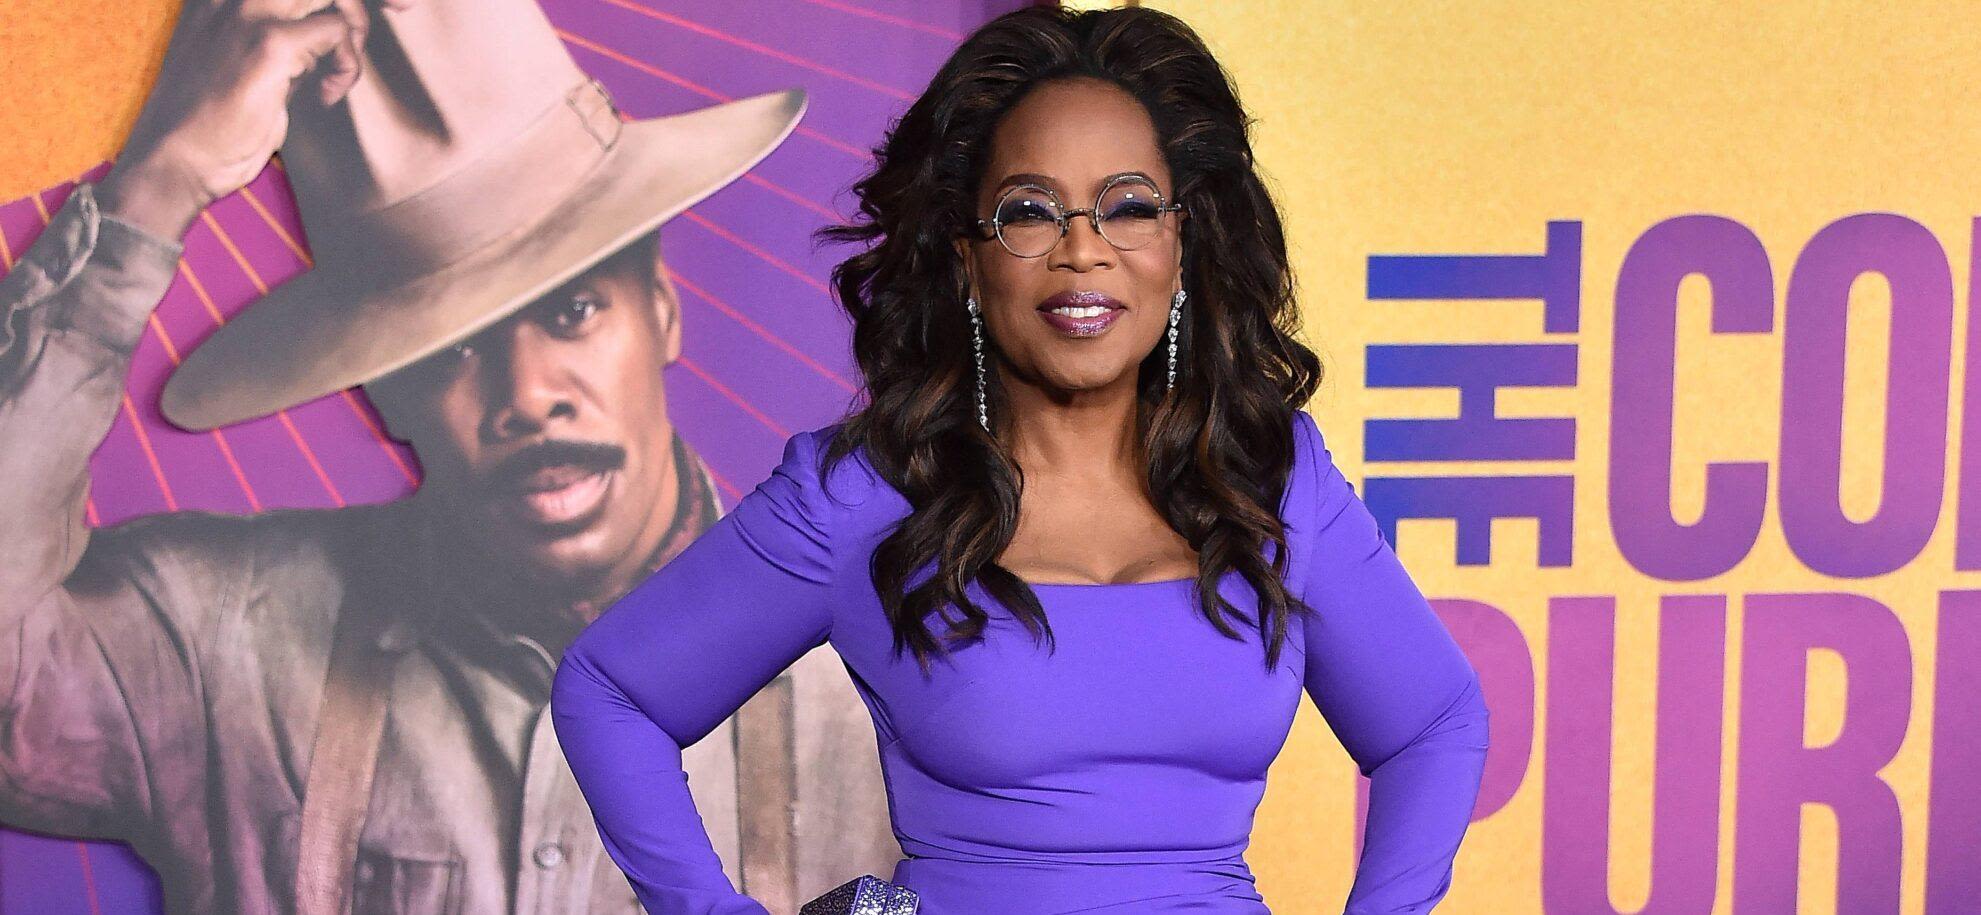 Oprah Winfrey Expresses Regret For Being A 'Major Contributor' To Diet Culture